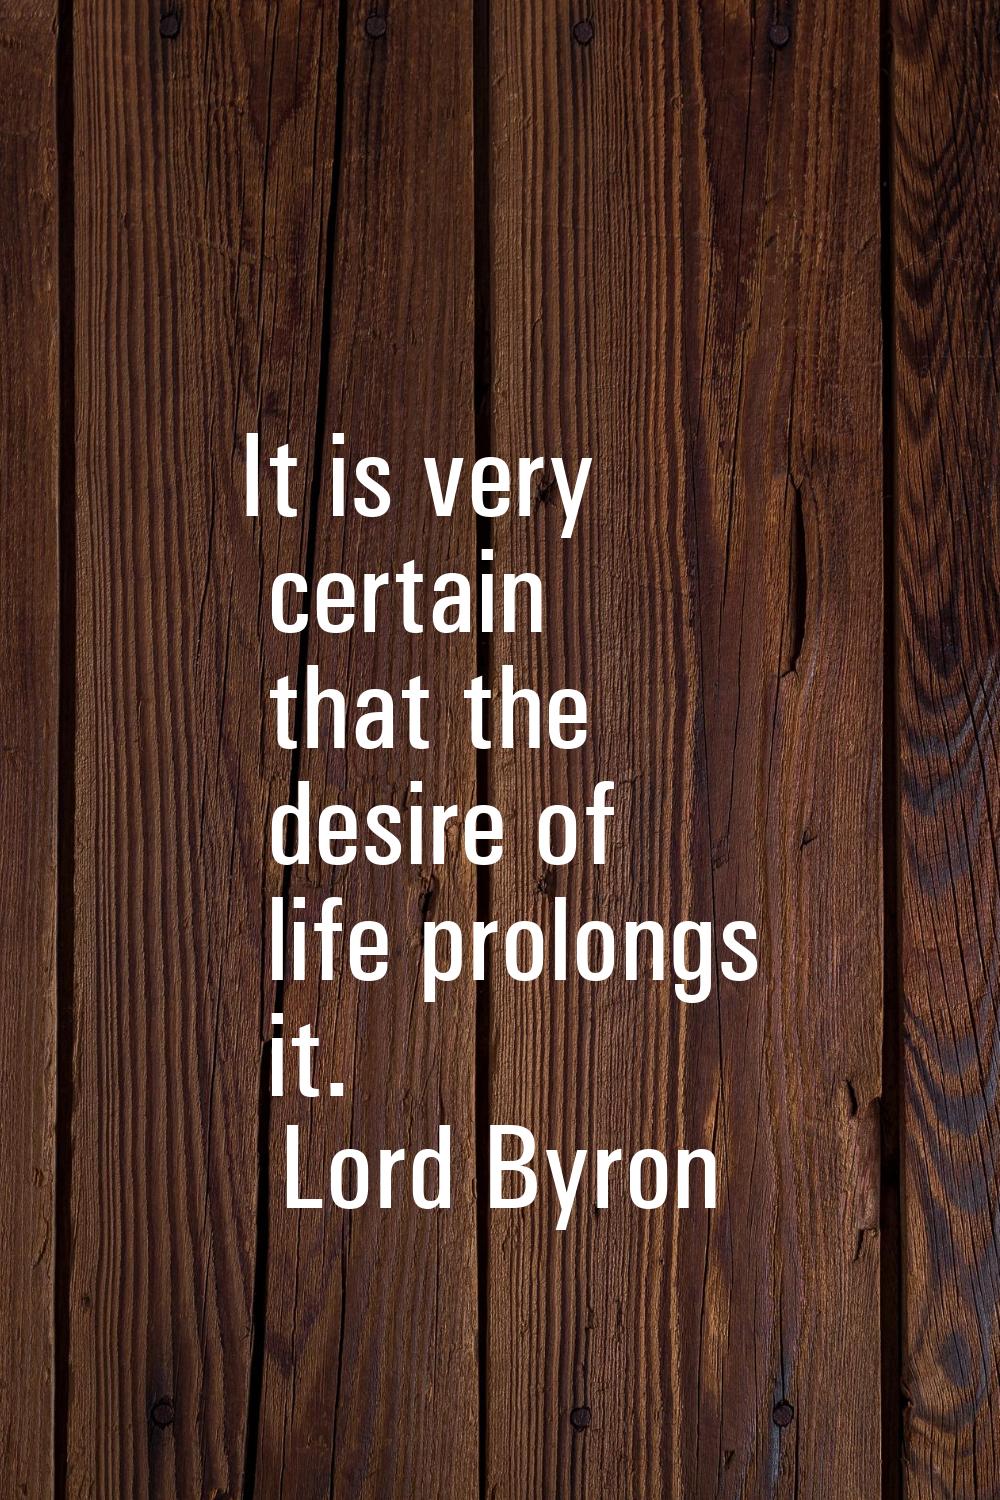 It is very certain that the desire of life prolongs it.